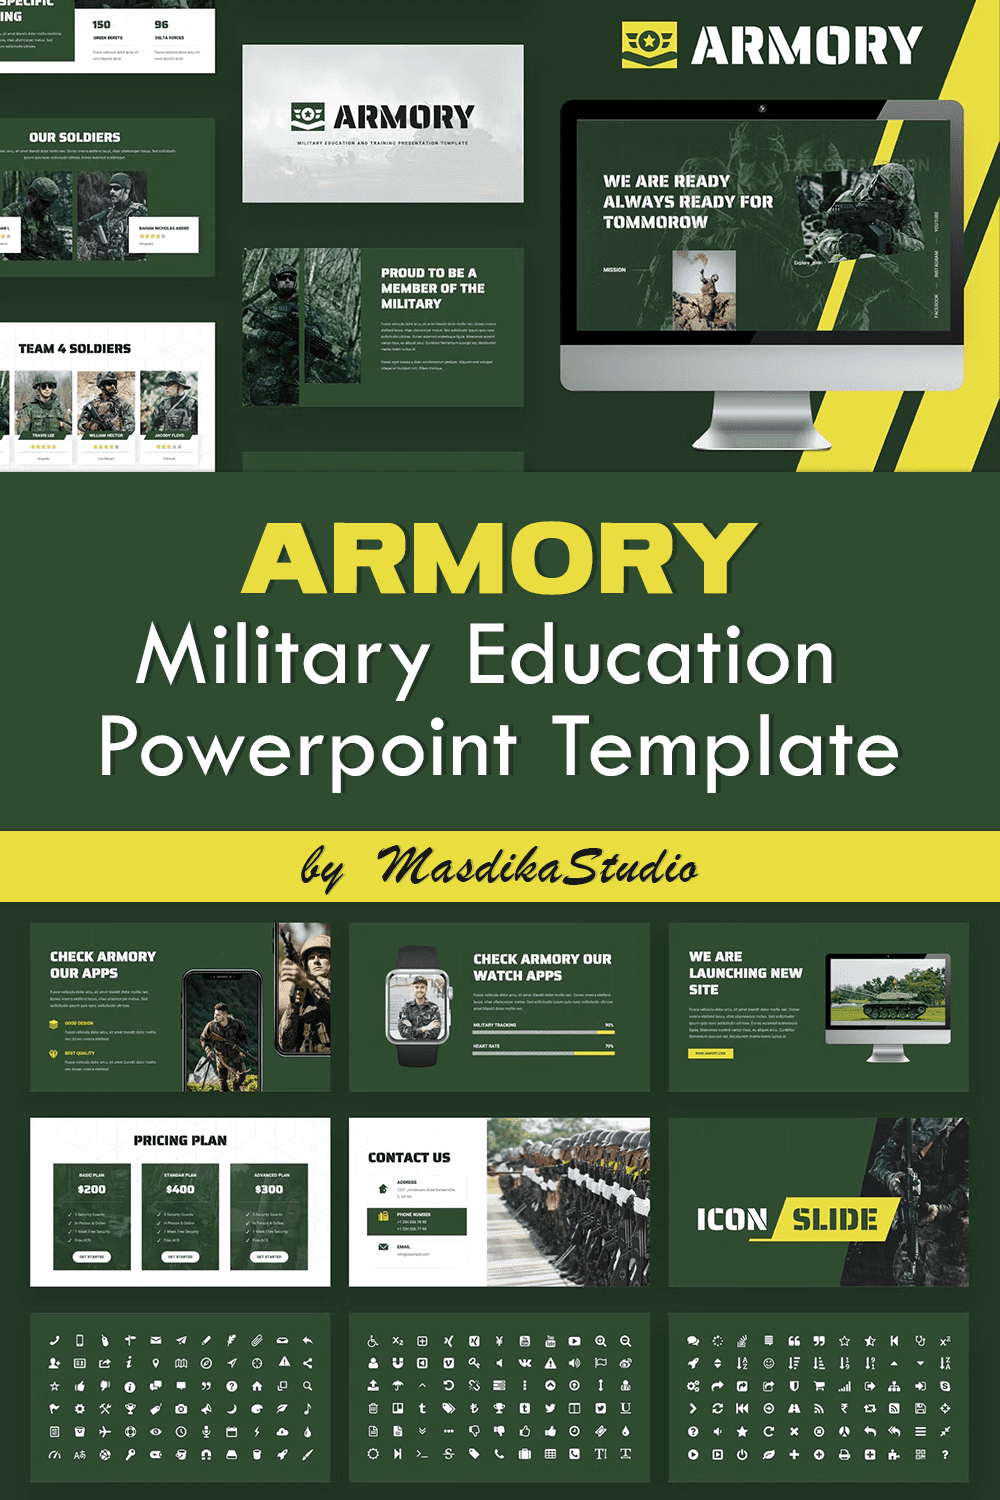 Armory - Military Education Powerpoint Template - Pinterest.